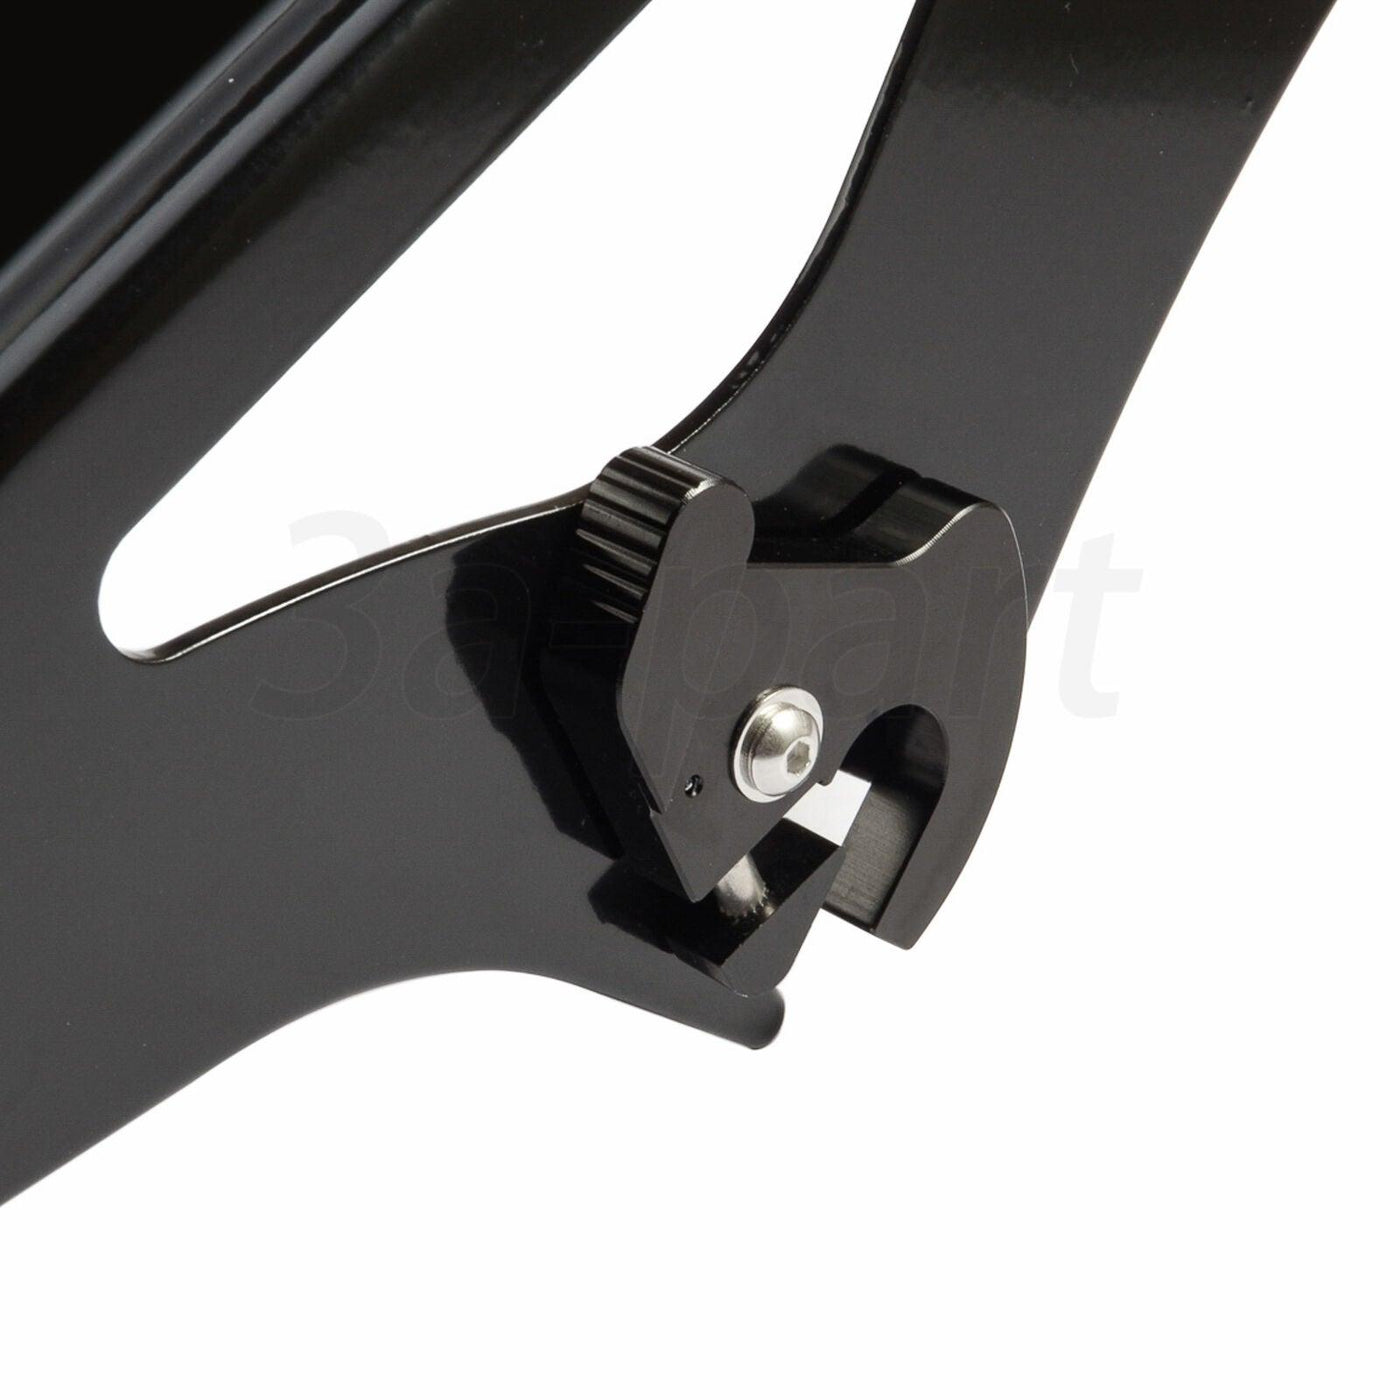 Detachable Two Up Tour Pack Mounting Rack Fit For Harley Road Glide King 2009-13 - Moto Life Products